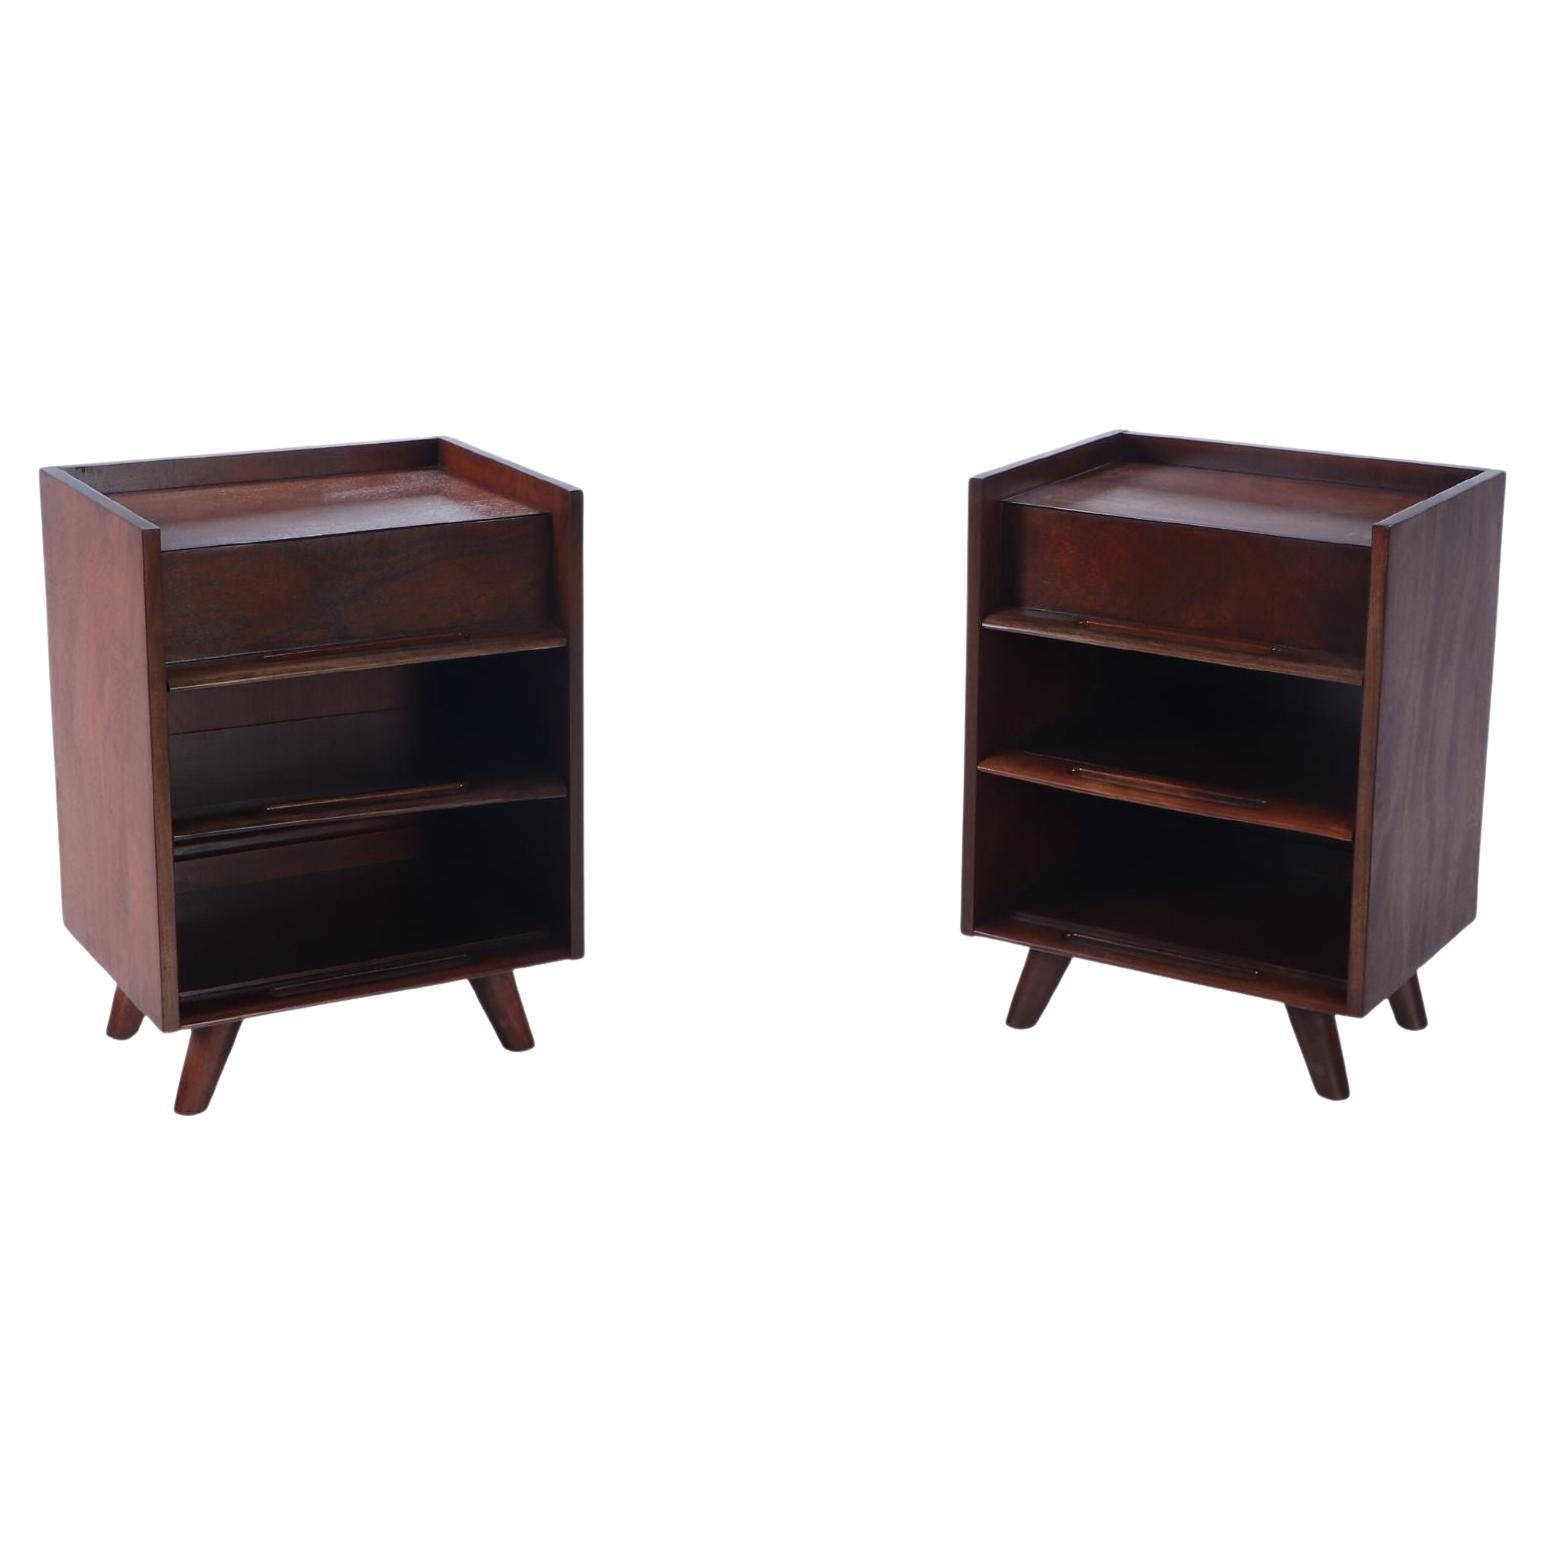 A pair of Edmond Spence style Nightstands